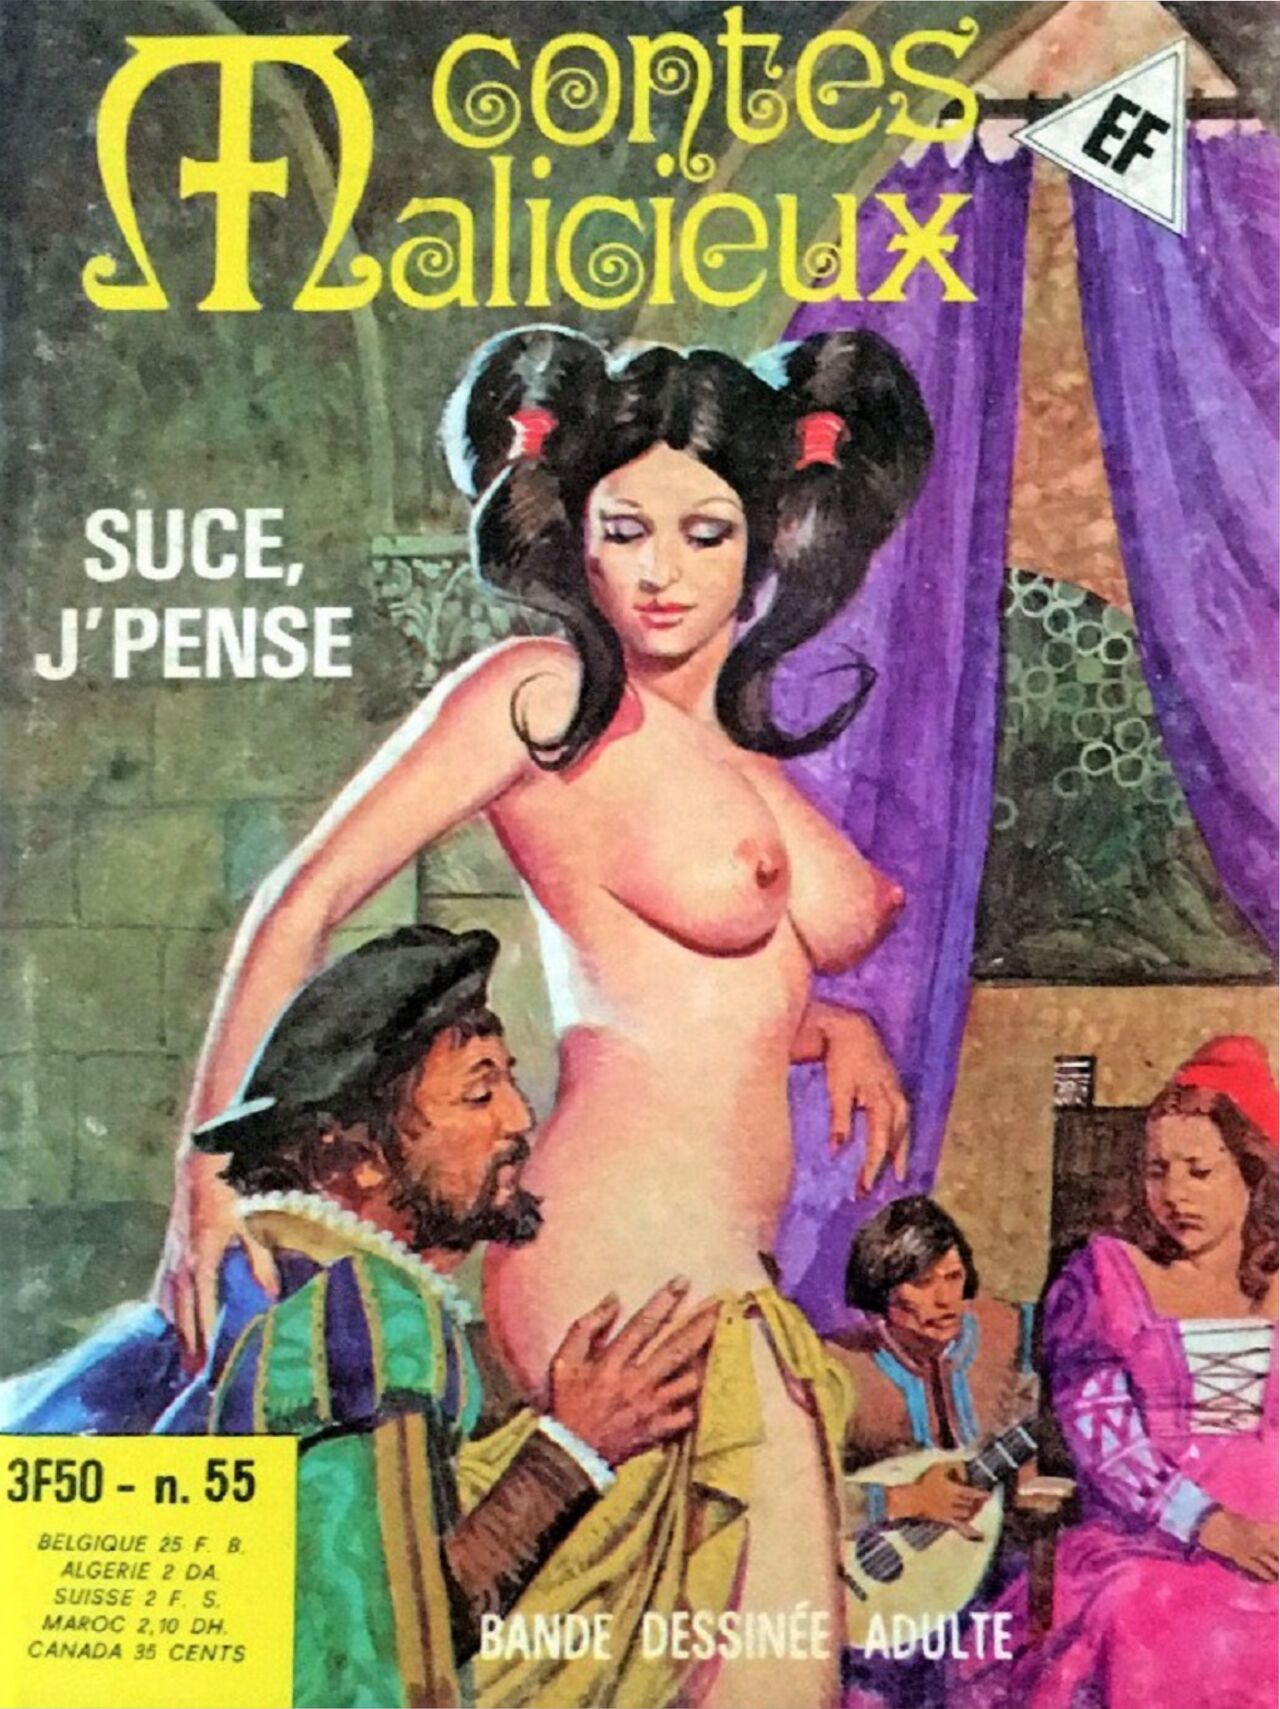 Contes Malicieux 55 : Suce, jpense